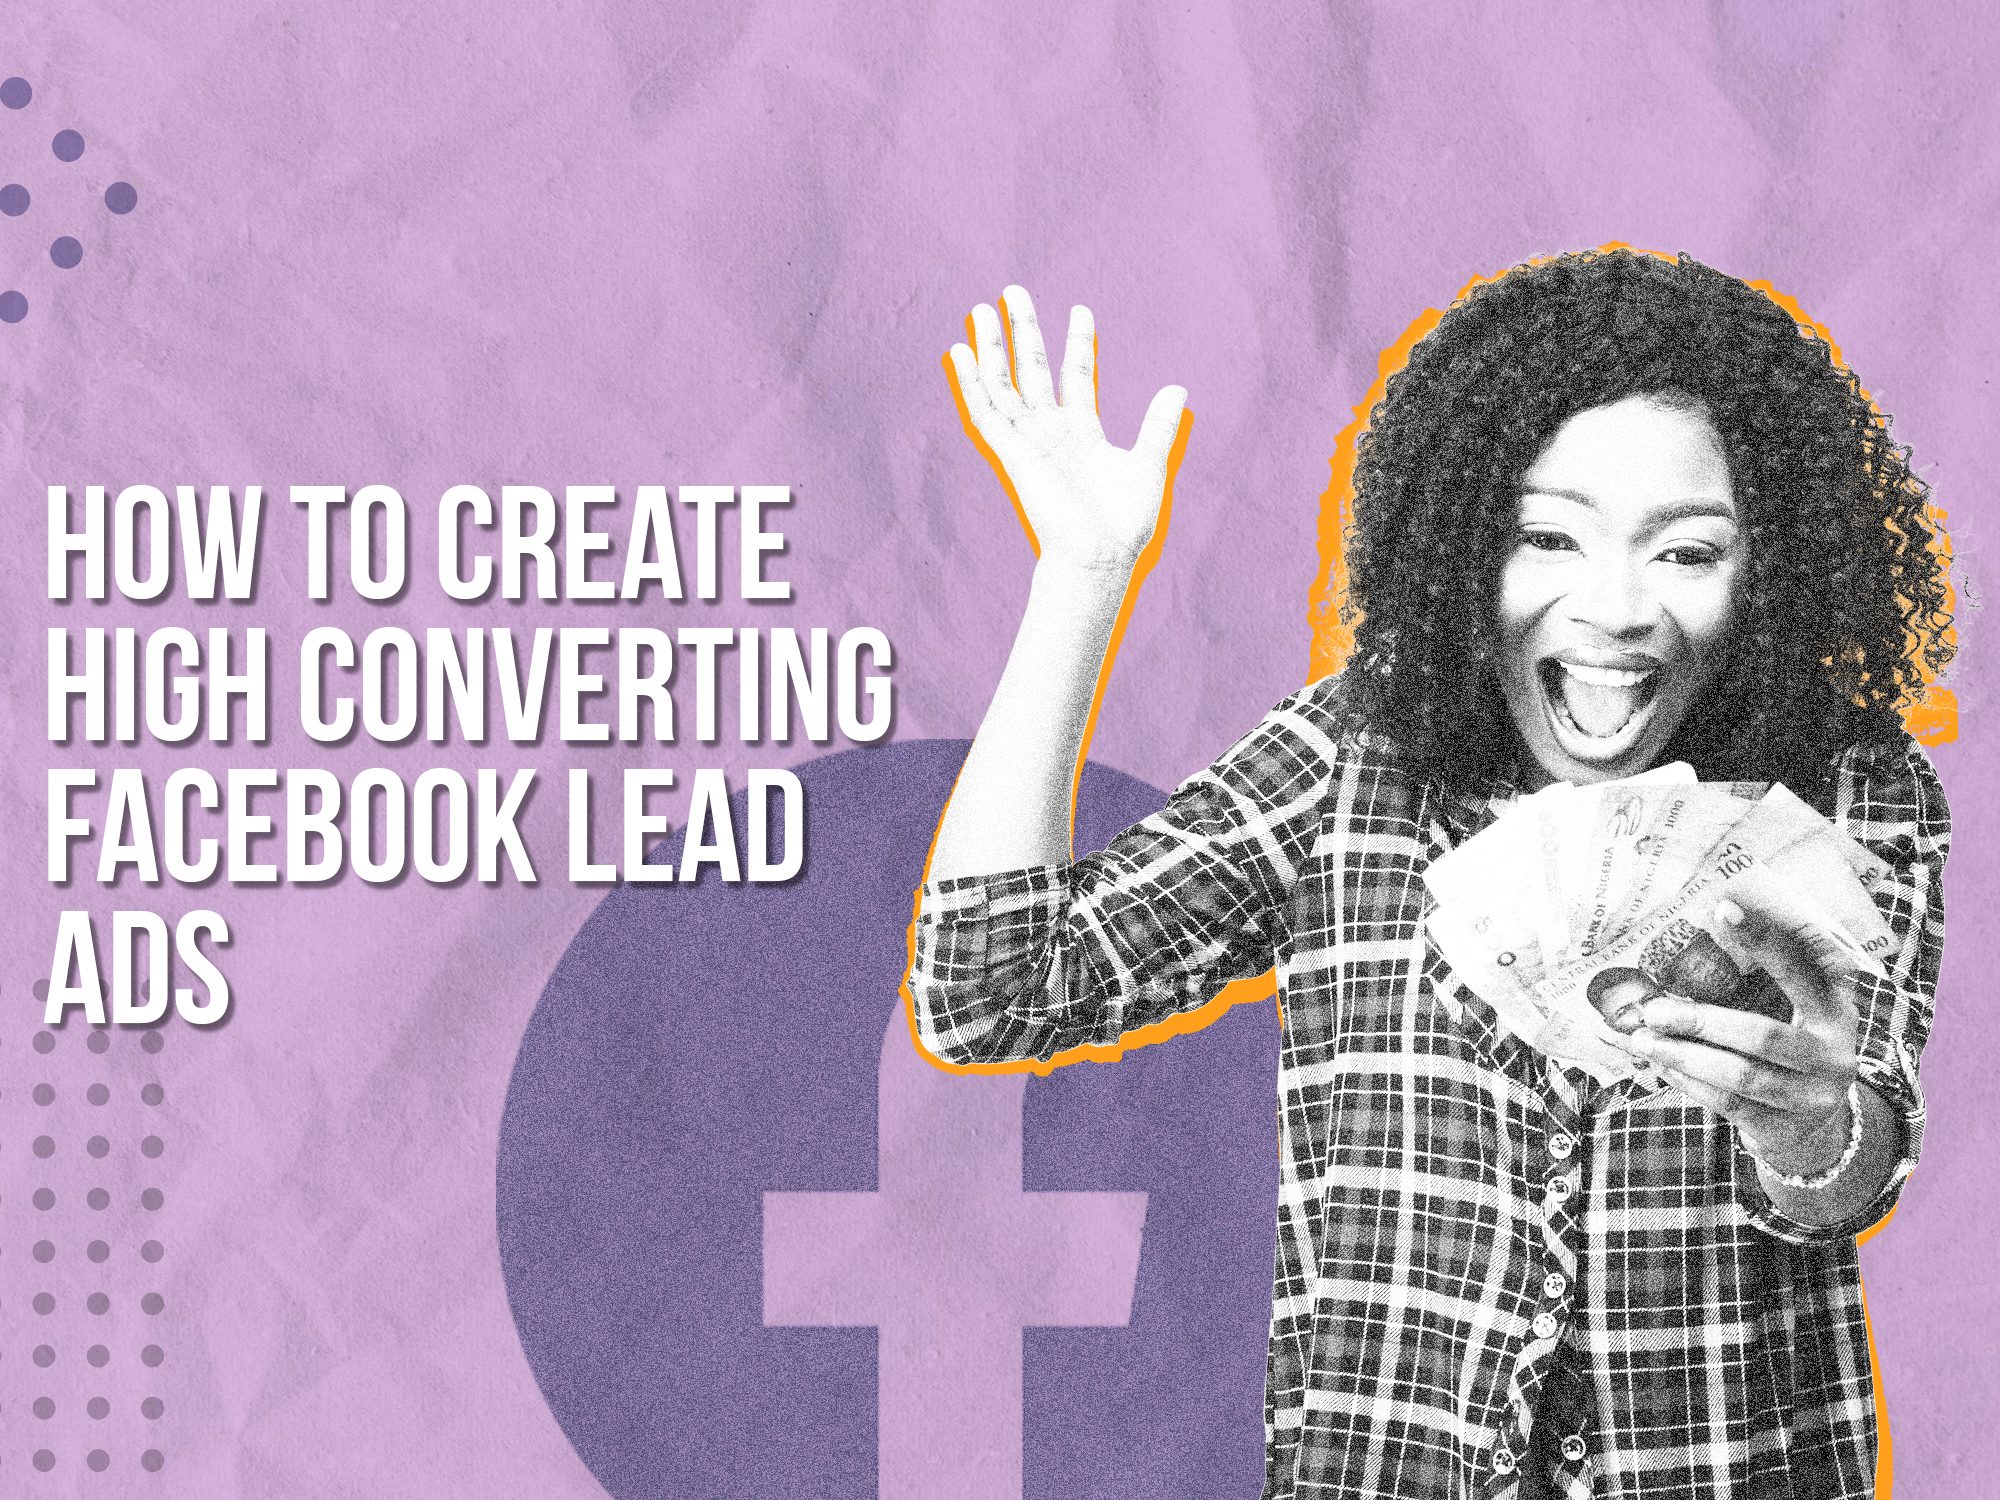 How to Create High Converting Facebook Lead Ads